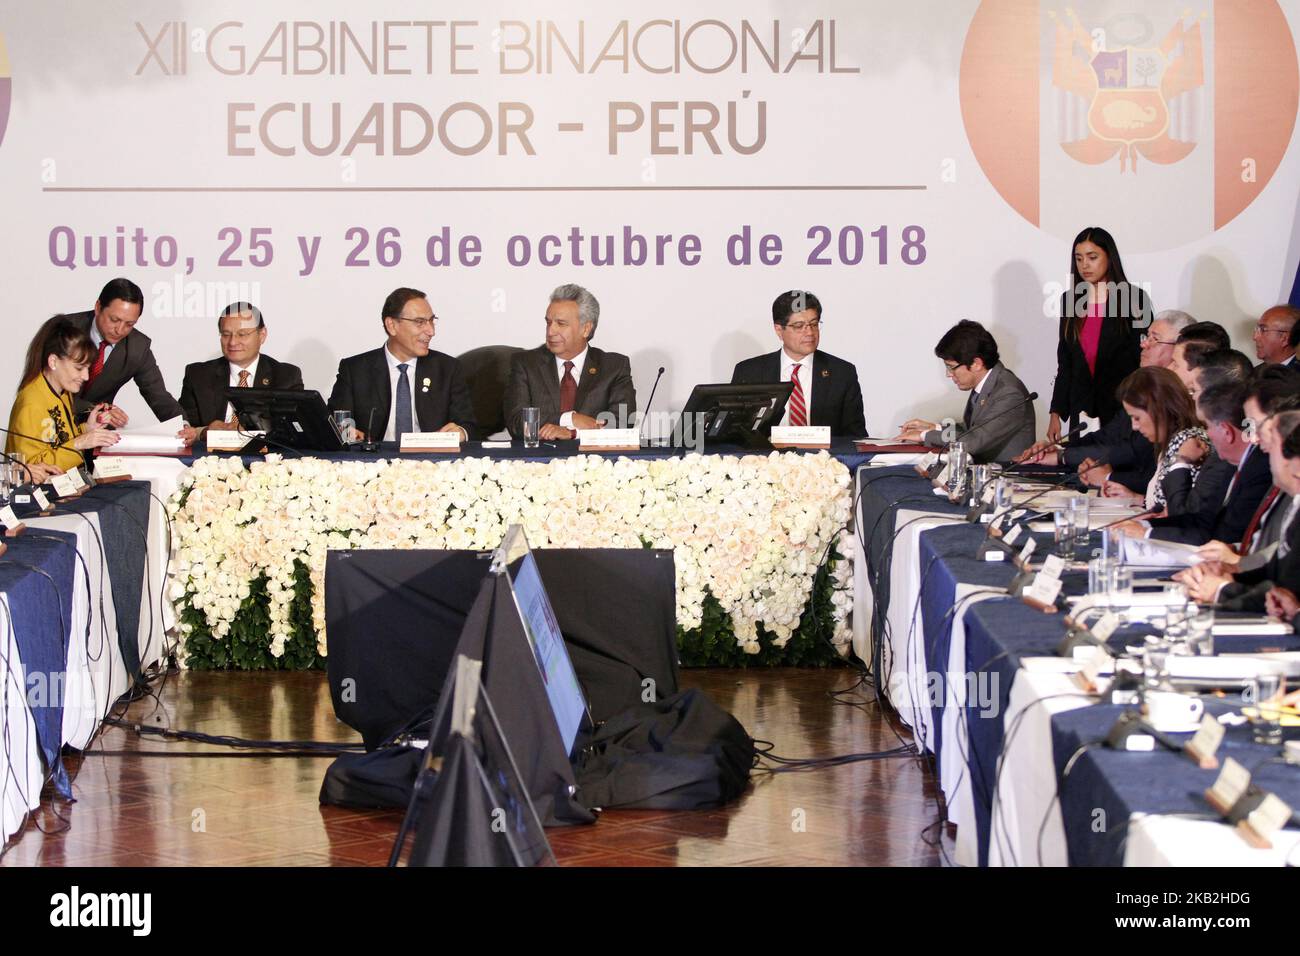 President of Ecuador, Lenin Moreno with his counterpart, Martin Vizcarra, President of Peru, inaugurated the XII Binational Cabinet in the Government Palace, the objective is to evaluate the progress of bilateral relations, in Quito, Ecuador, Friday, October 26, 2018 . (Photo by Gabriela Mena/PRESSOUTH/NurPhoto) Stock Photo